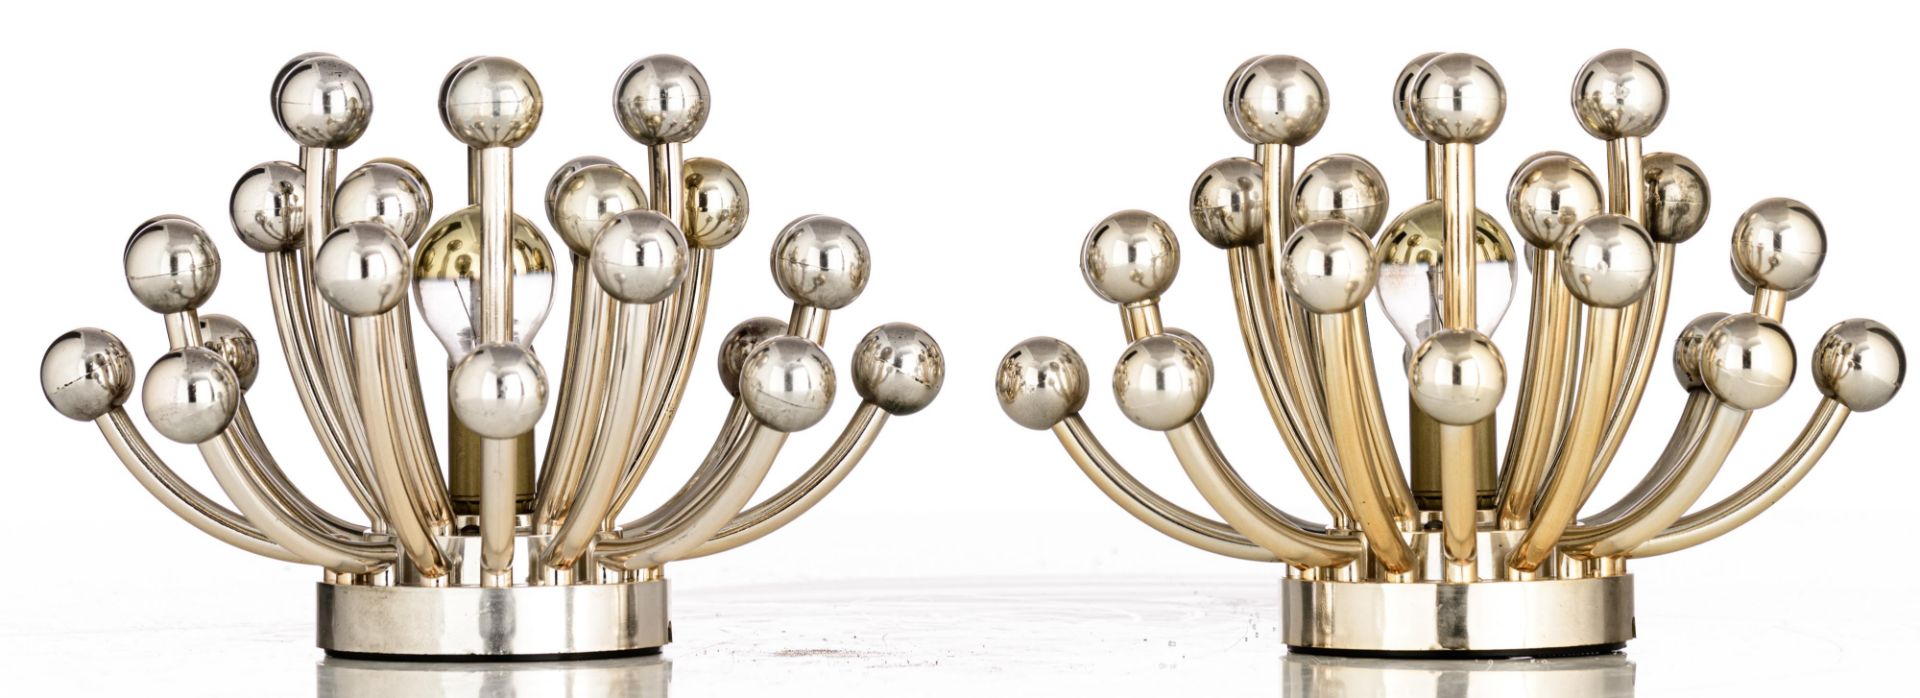 A pair of Pistillino wall or ceiling lights, Studio Tetrarch for Valenti & Co., Italy, chrome plated - Bild 4 aus 6